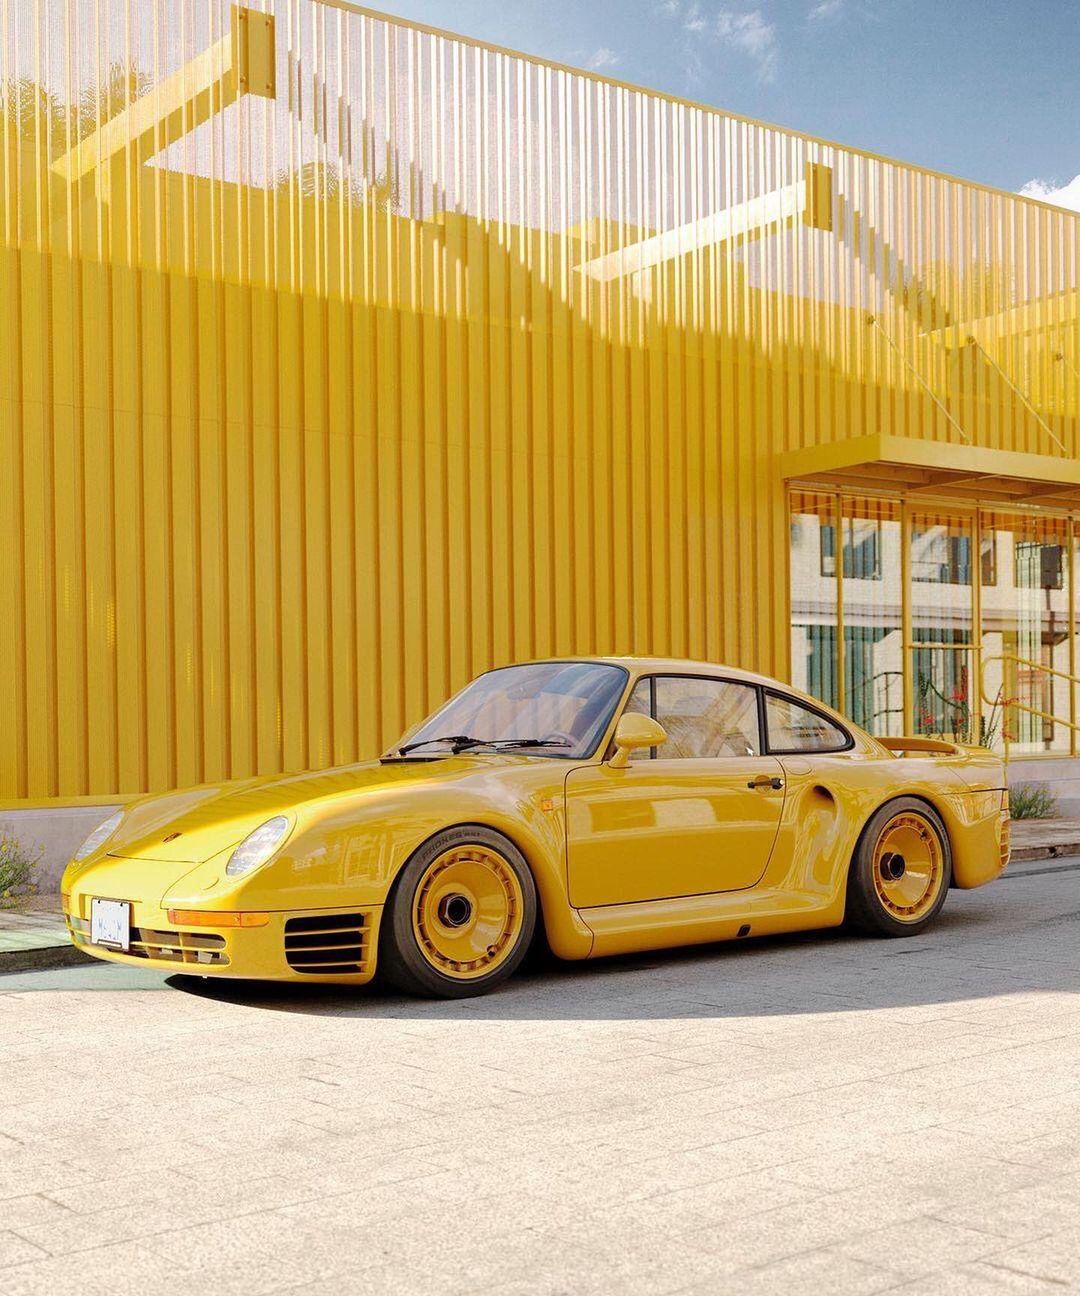 CGI Porsche 959 in yellow, building in matching colour behind